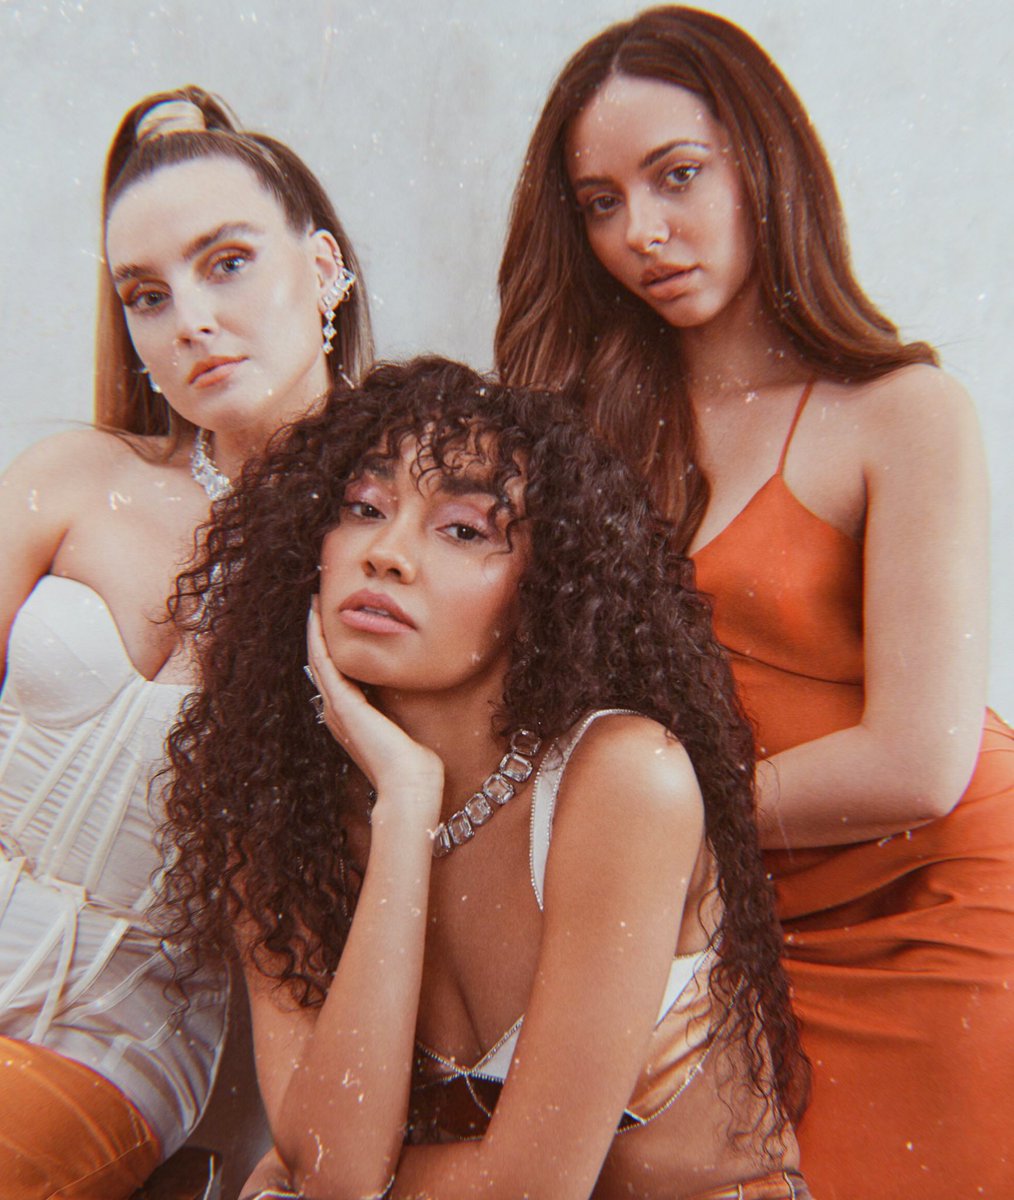 little mix, mistreatments and consequences on their career: an informative thread